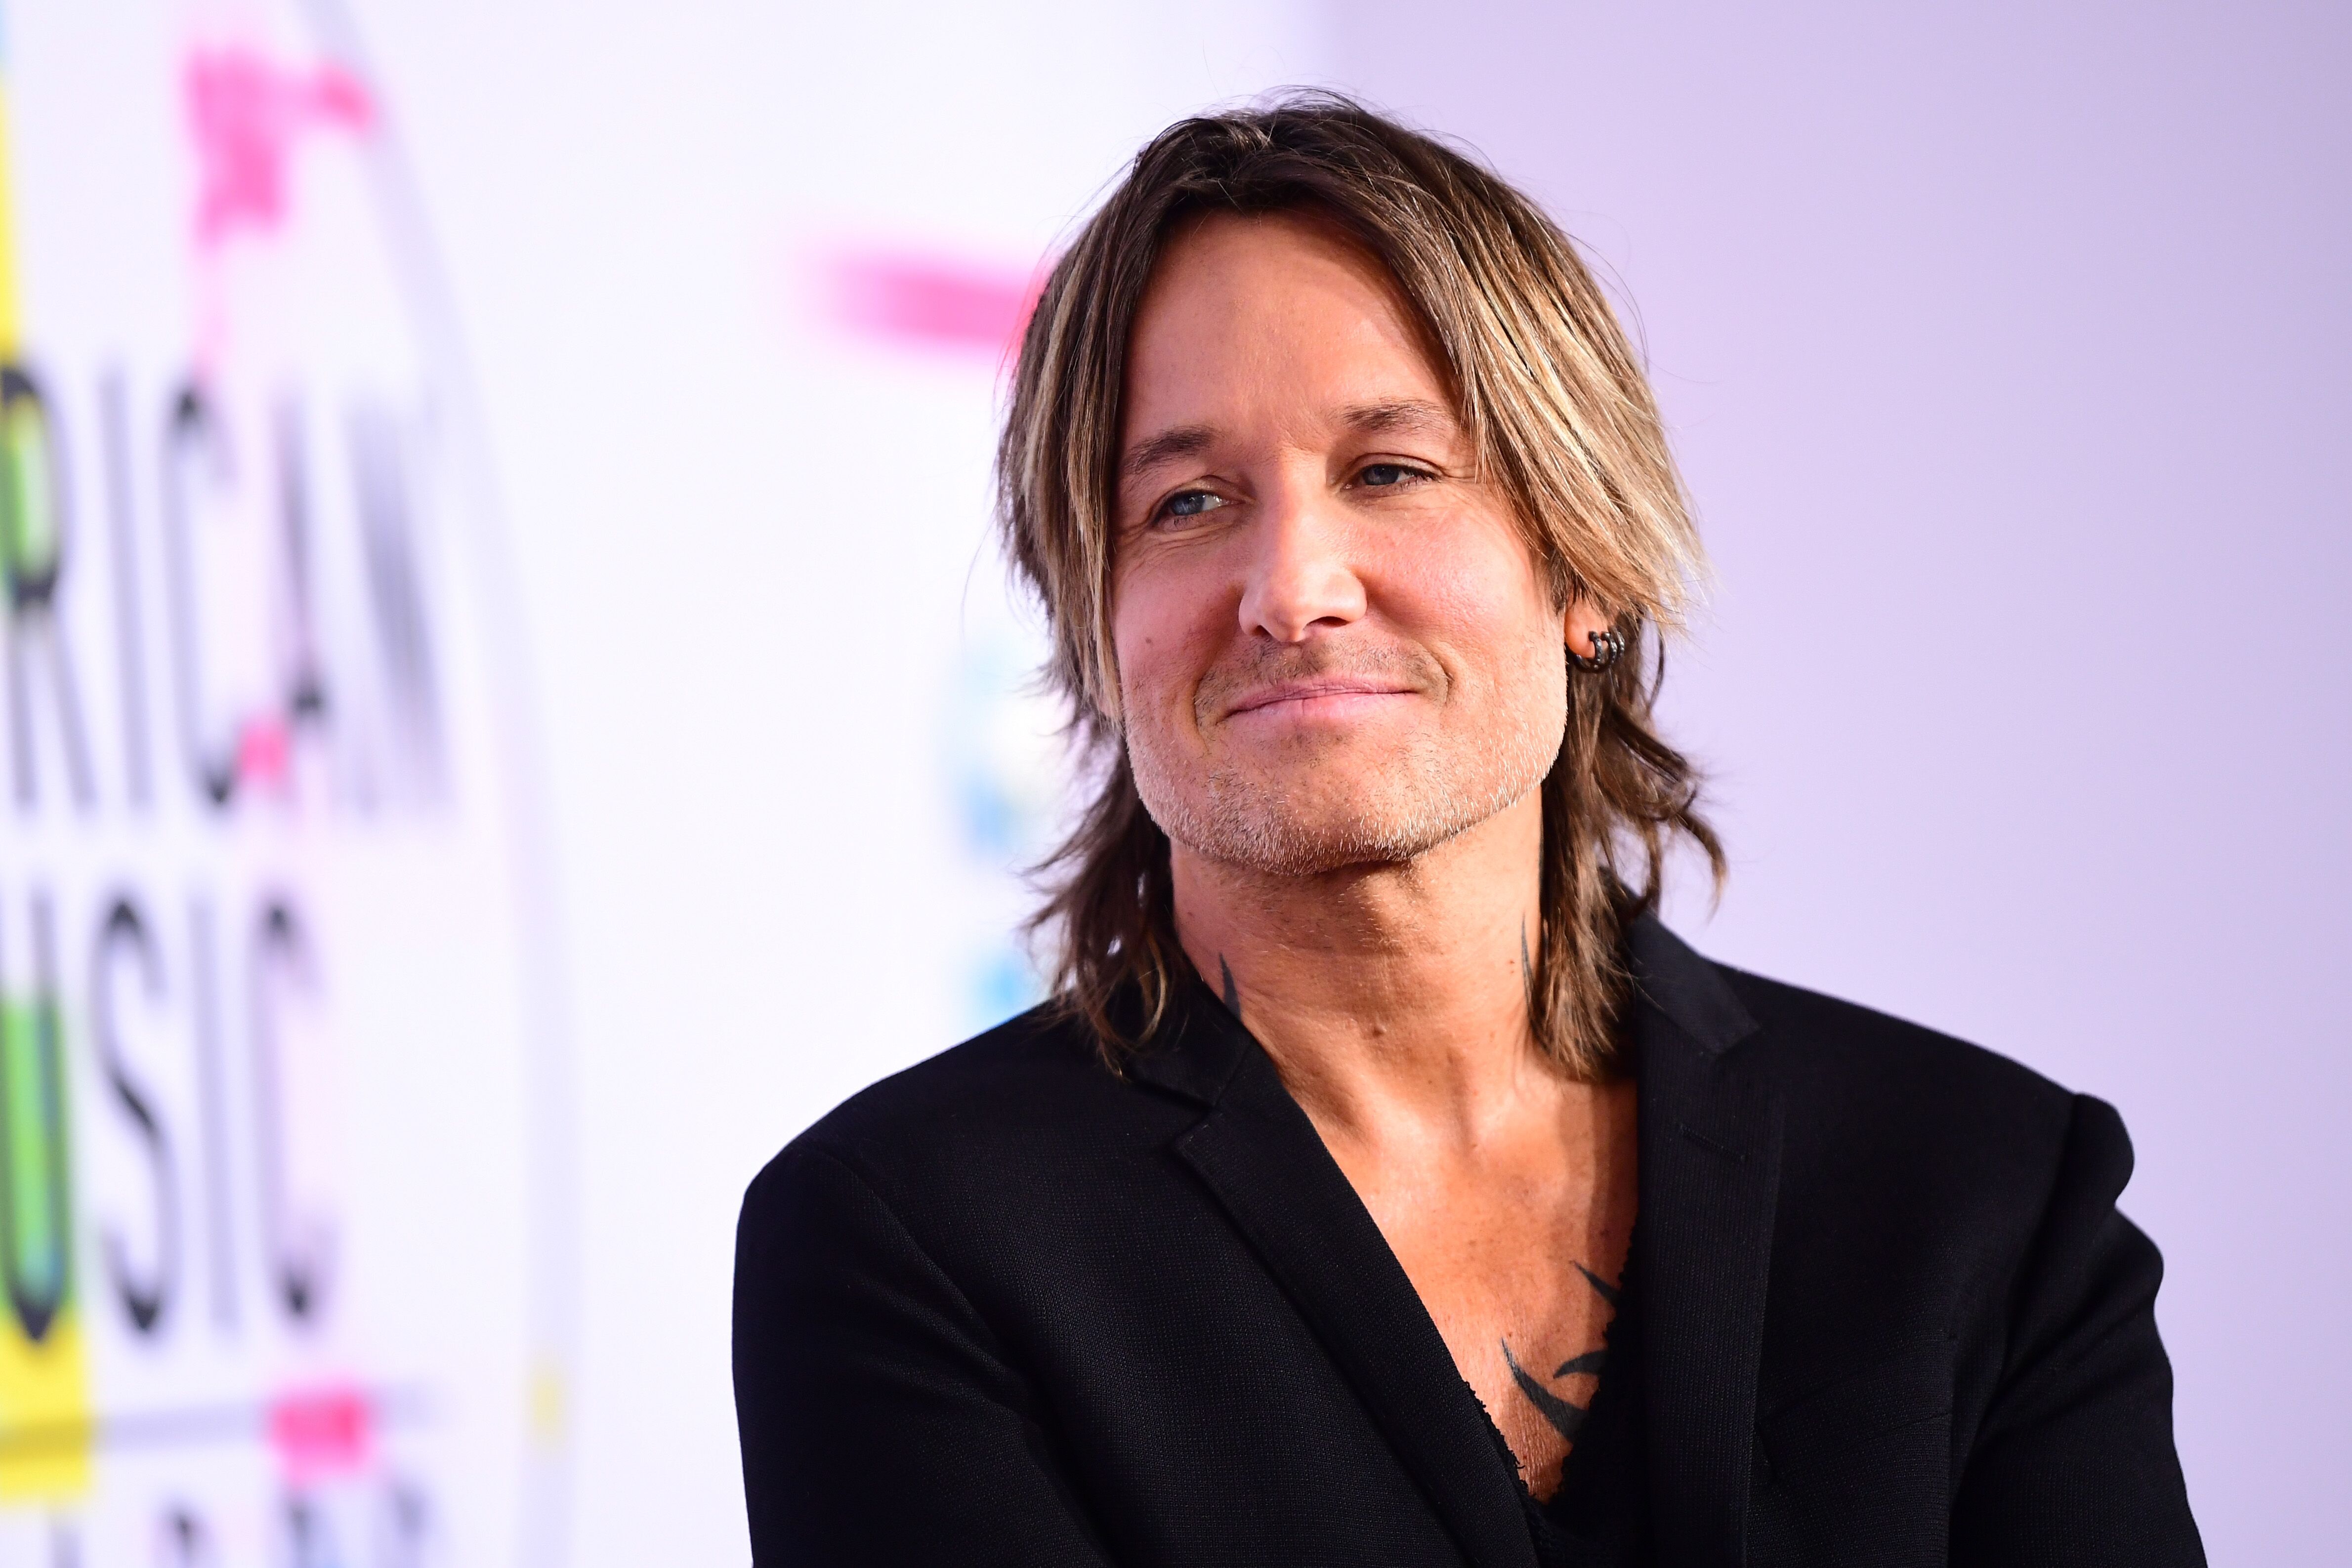 Keith Urban attends the 2017 American Music Awards at Microsoft Theater on November 19, 2017 in Los Angeles, California | Photo: Getty Images